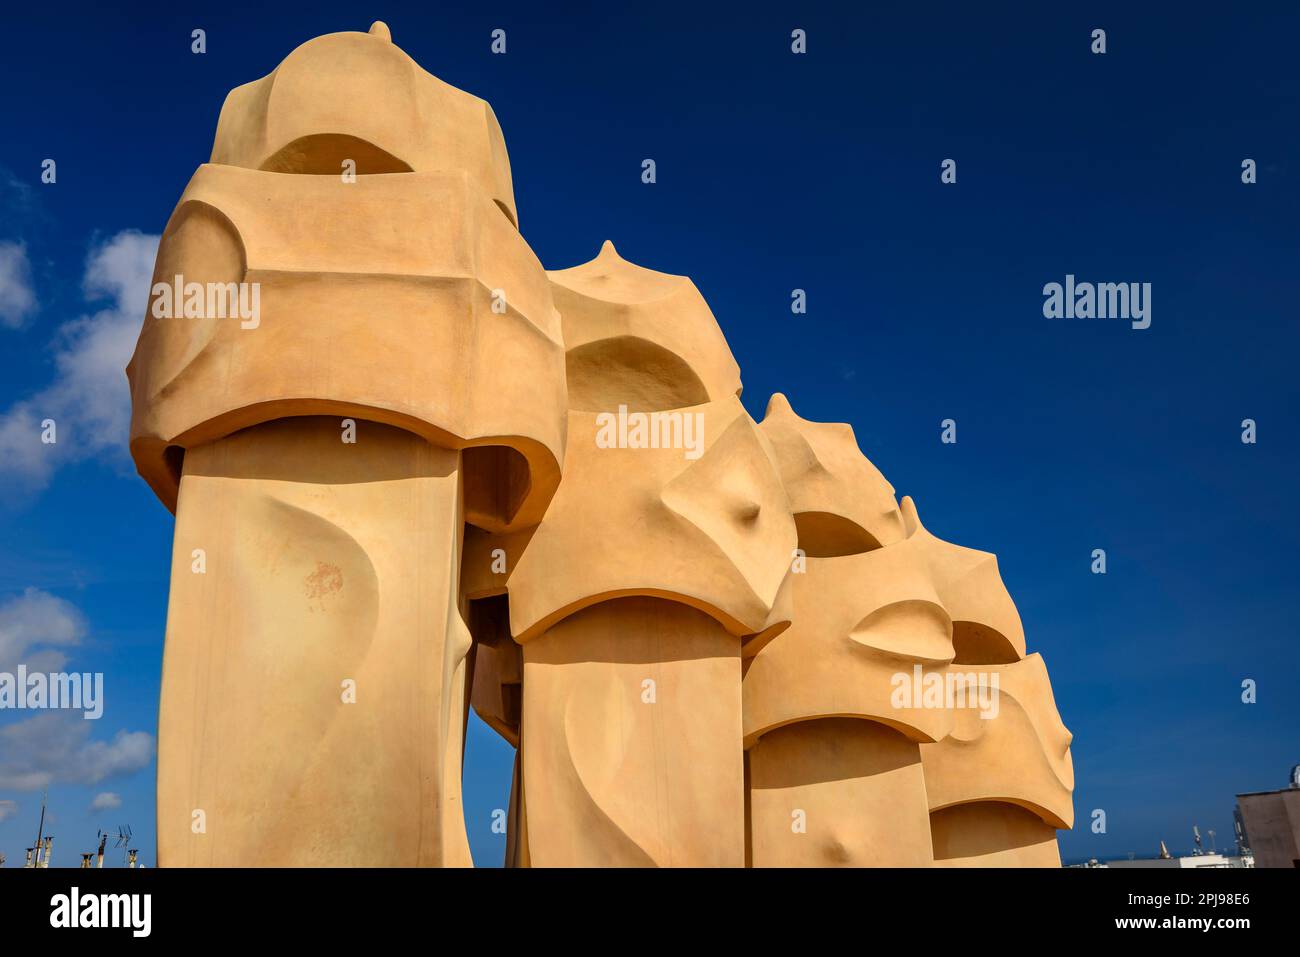 Chimneys in the shapes of soldiers / warriors on the rooftop of Casa Milà - La Pedrera designed by Antoni Gaudí (Barcelona, Catalonia, Spain) Stock Photo